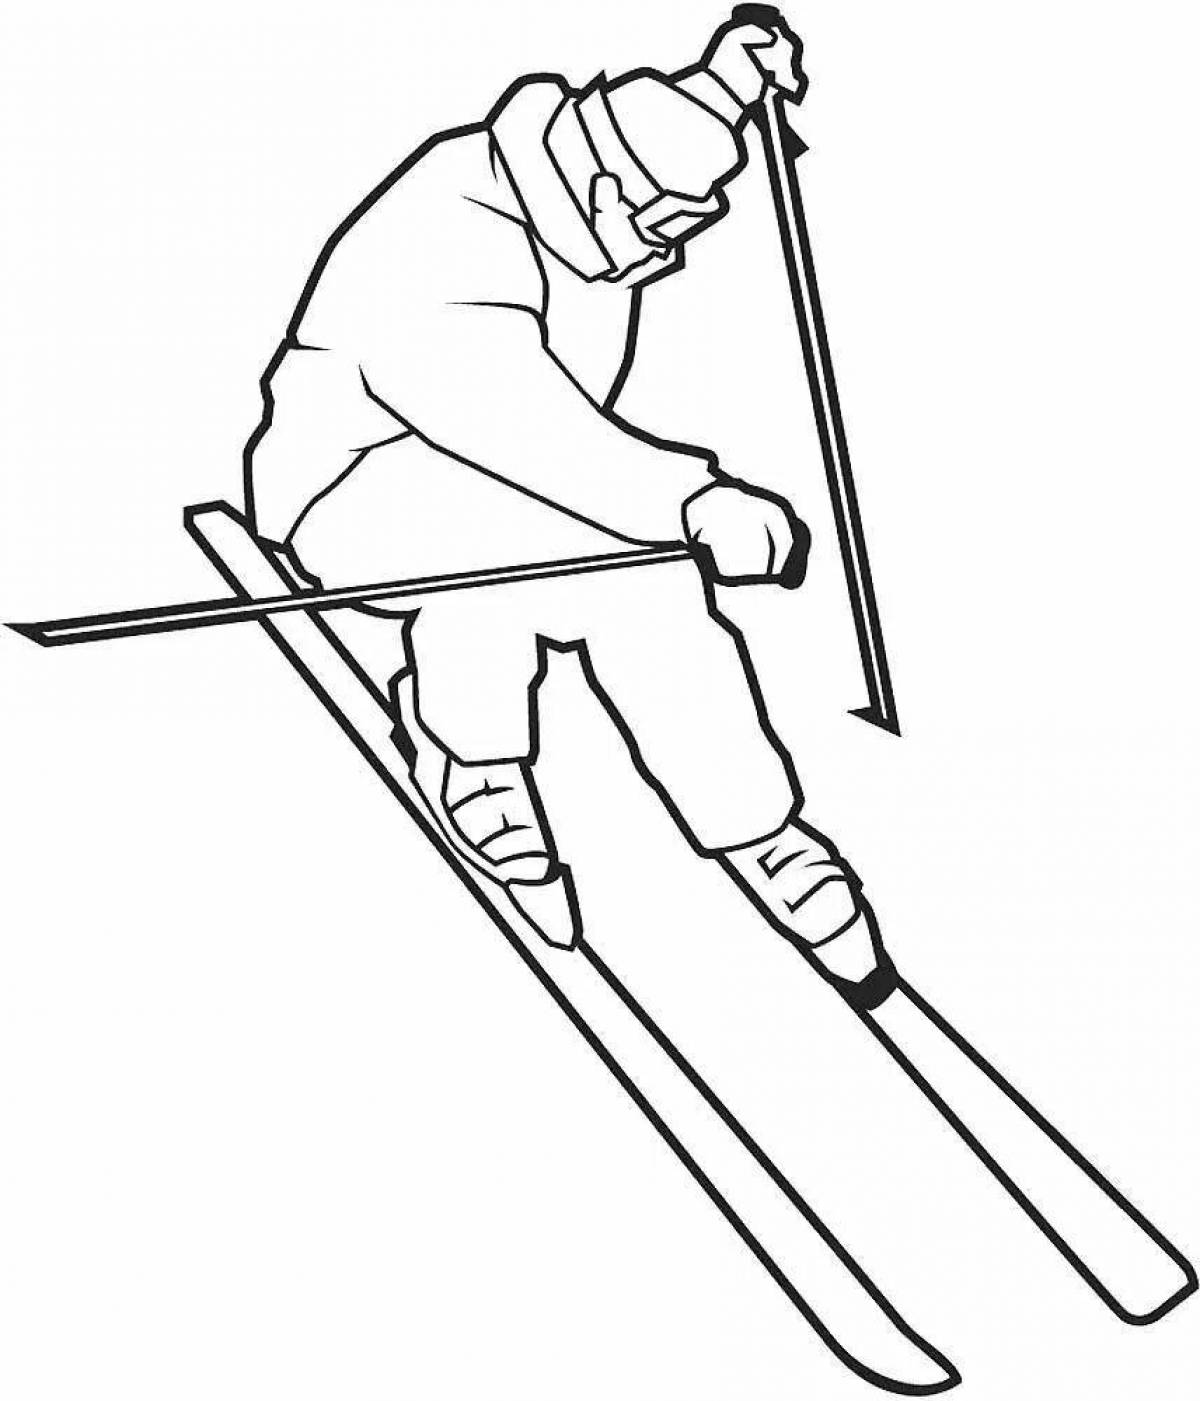 Coloring book for beginner skiers